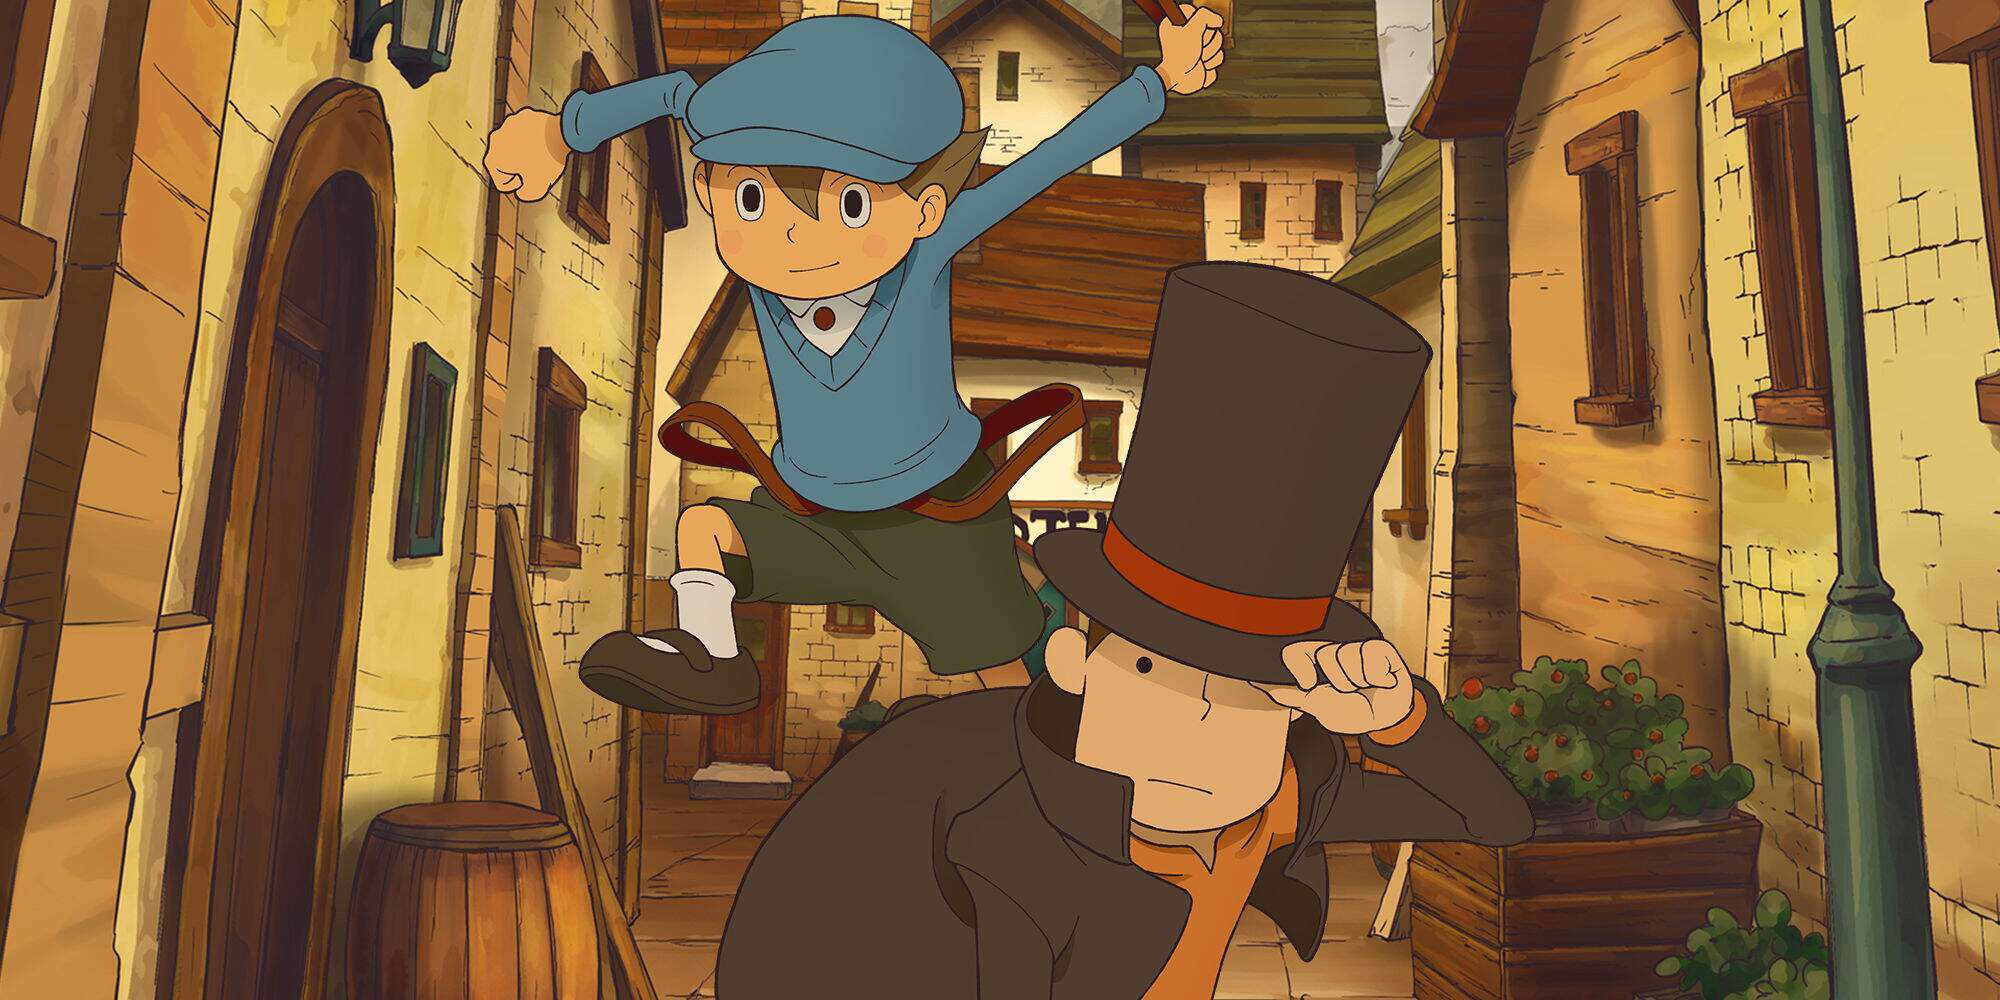 Professor Layton with Luke jumping behind him in a stone alleyway